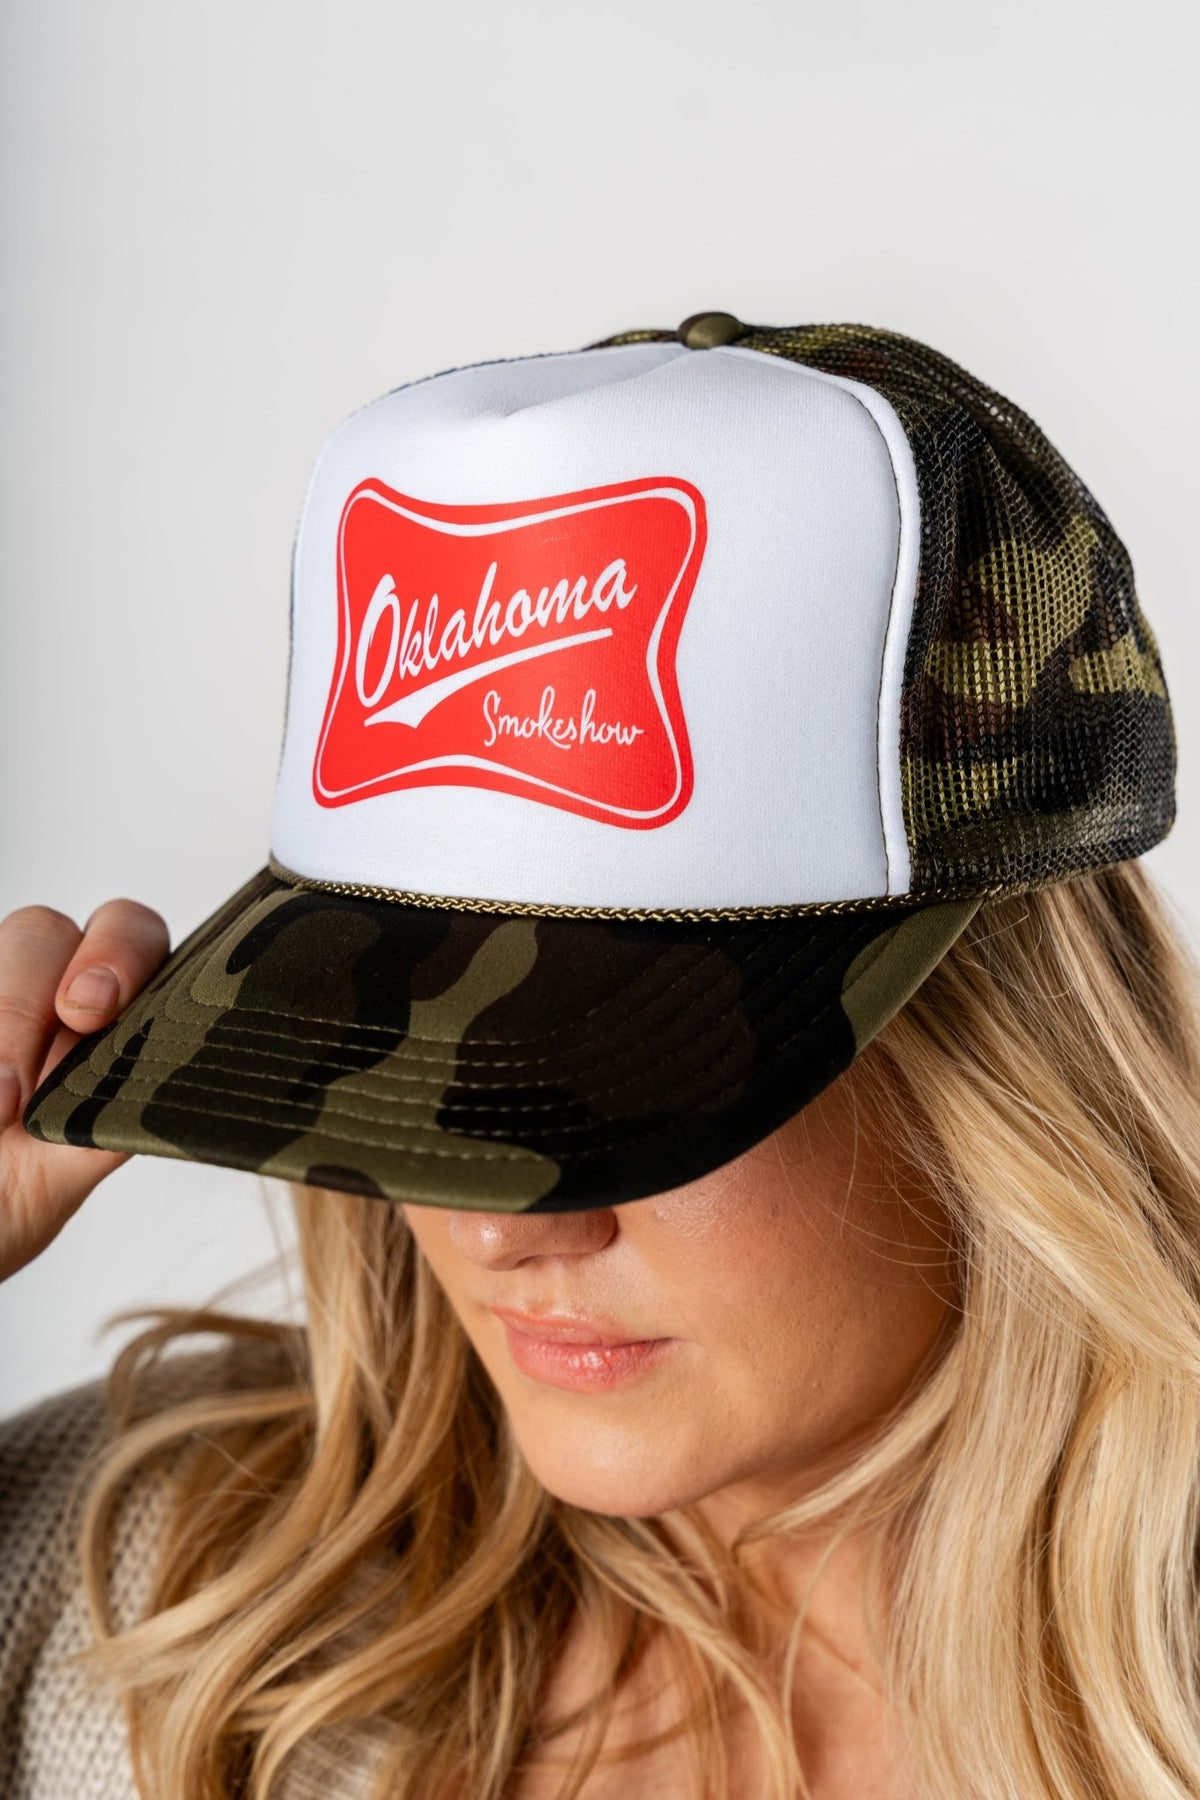 Oklahoma smokeshow trucker hat camo/red - Trendy Hats at Lush Fashion Lounge Boutique in Oklahoma City